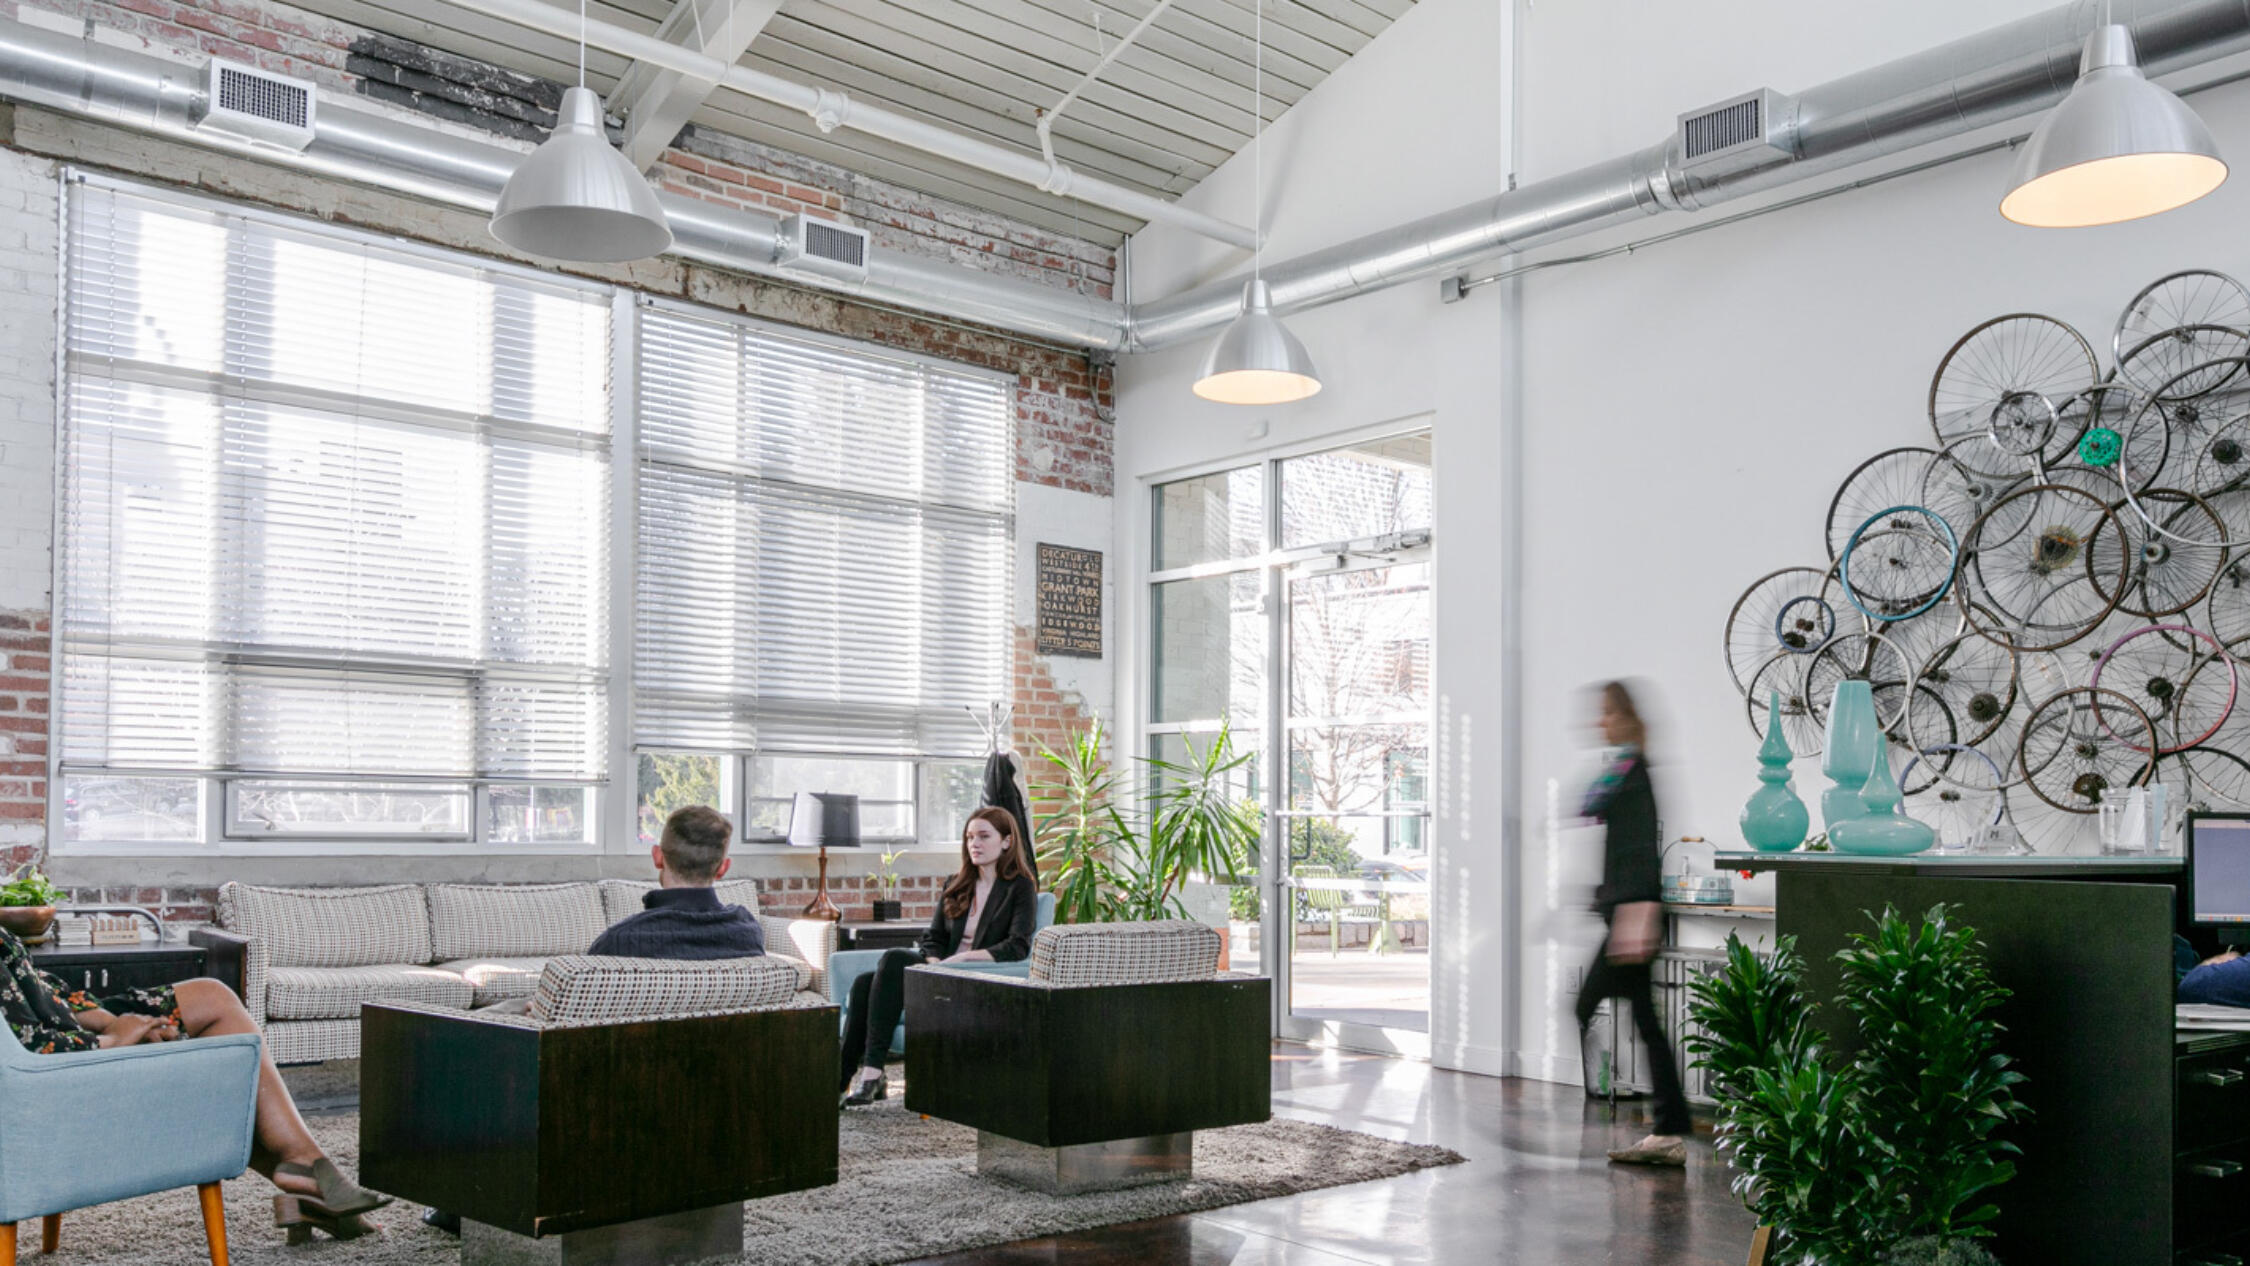 Southern Dairies spacious open-office creative space with workers collaborating